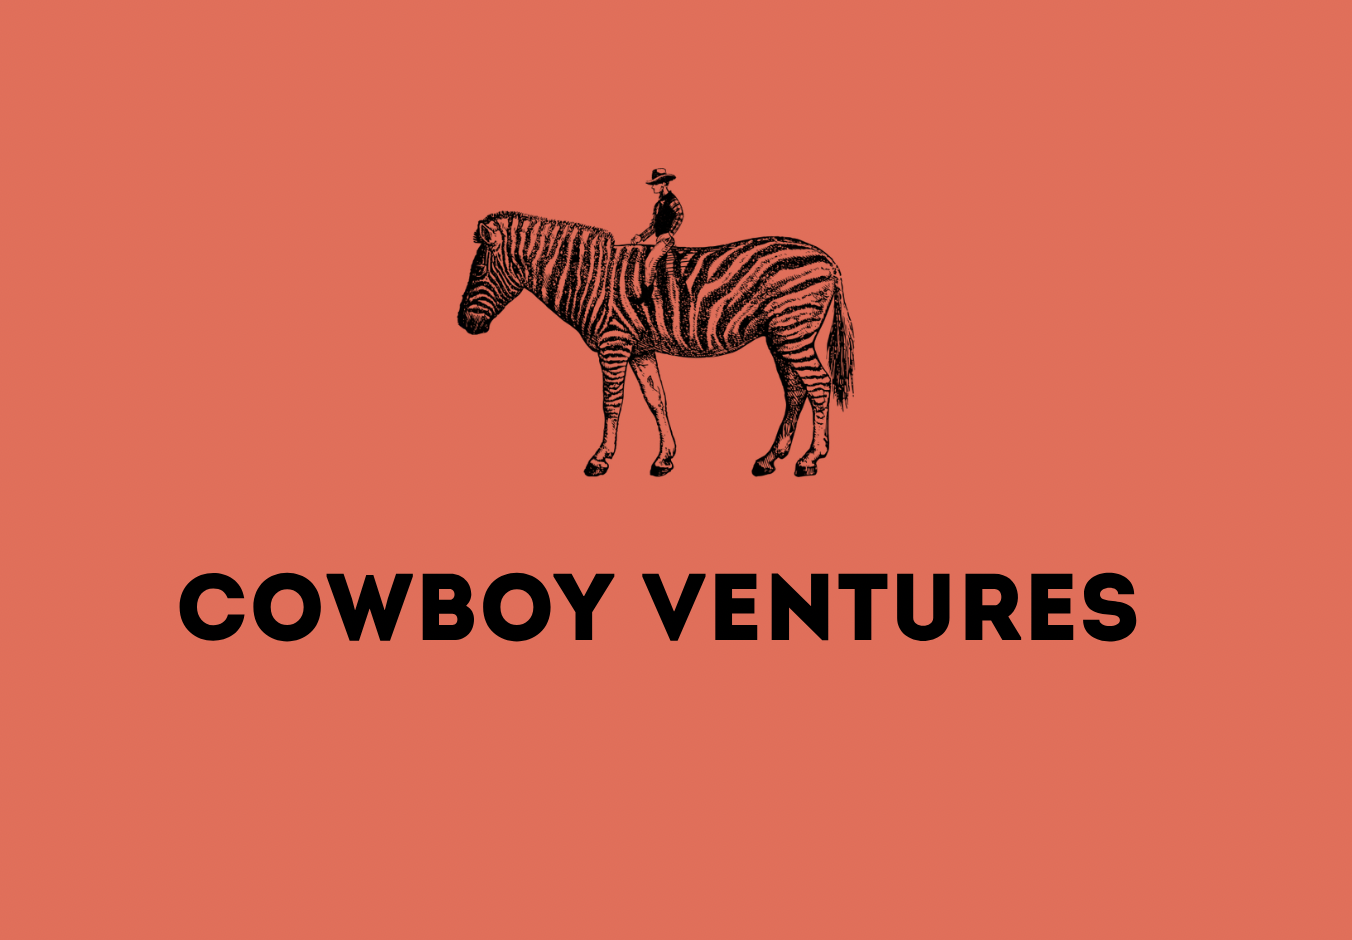 Cowboy Ventures goes bigger with $260M across two new funds, including an opportunity fund